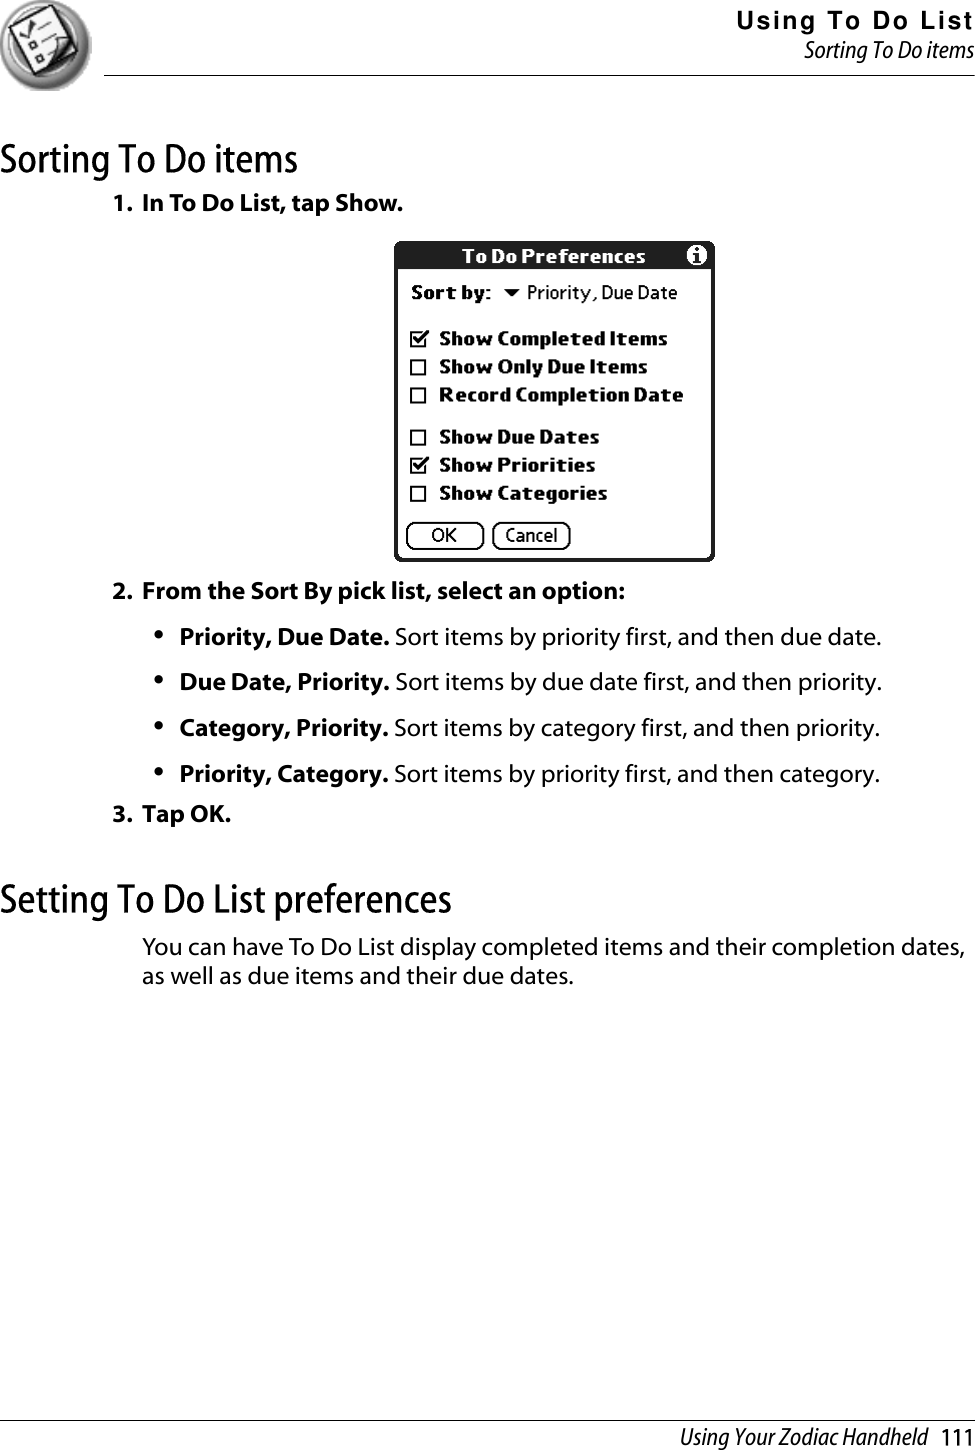 Using To Do ListSorting To Do itemsUsing Your Zodiac Handheld   111Sorting To Do items1. In To Do List, tap Show.2. From the Sort By pick list, select an option:•Priority, Due Date. Sort items by priority first, and then due date. •Due Date, Priority. Sort items by due date first, and then priority.•Category, Priority. Sort items by category first, and then priority. •Priority, Category. Sort items by priority first, and then category. 3. Tap OK.Setting To Do List preferencesYou can have To Do List display completed items and their completion dates, as well as due items and their due dates. 